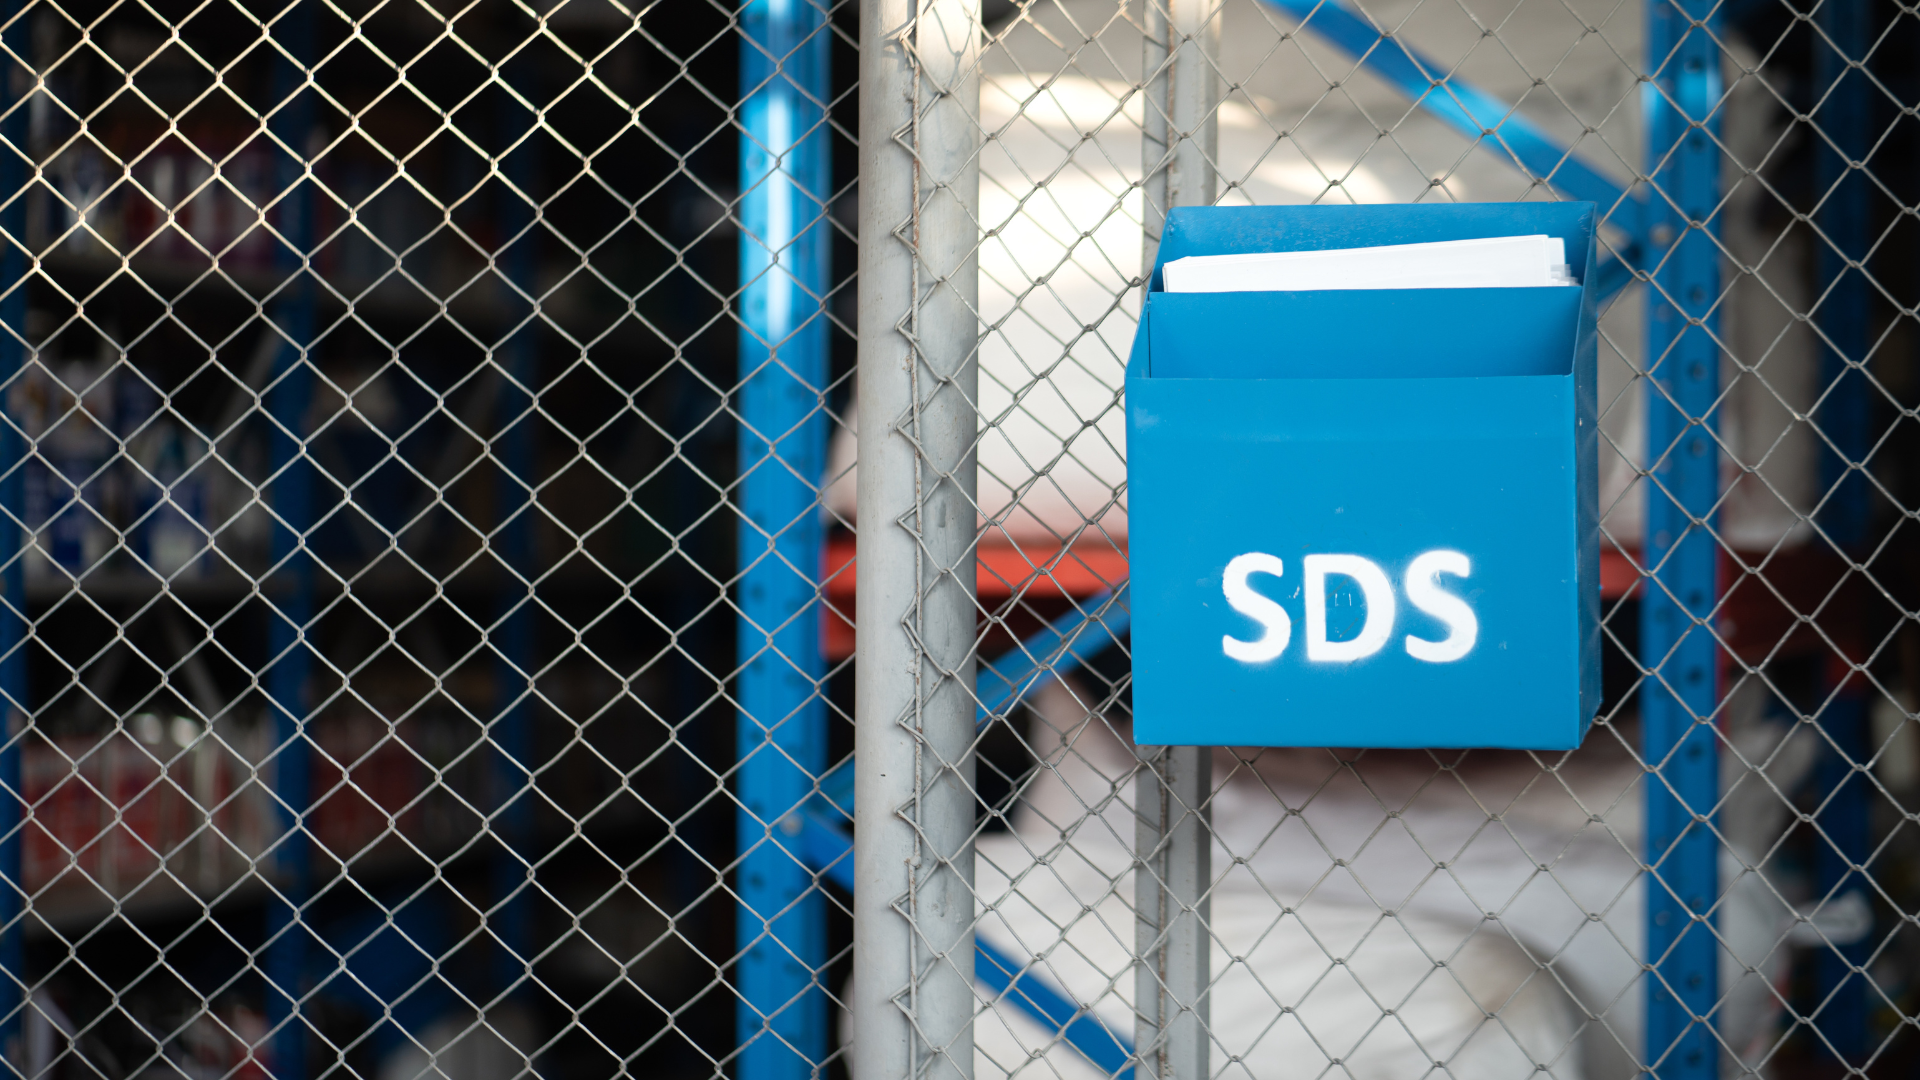 What You Need to Know to Ensure Effective Usage of SDSs